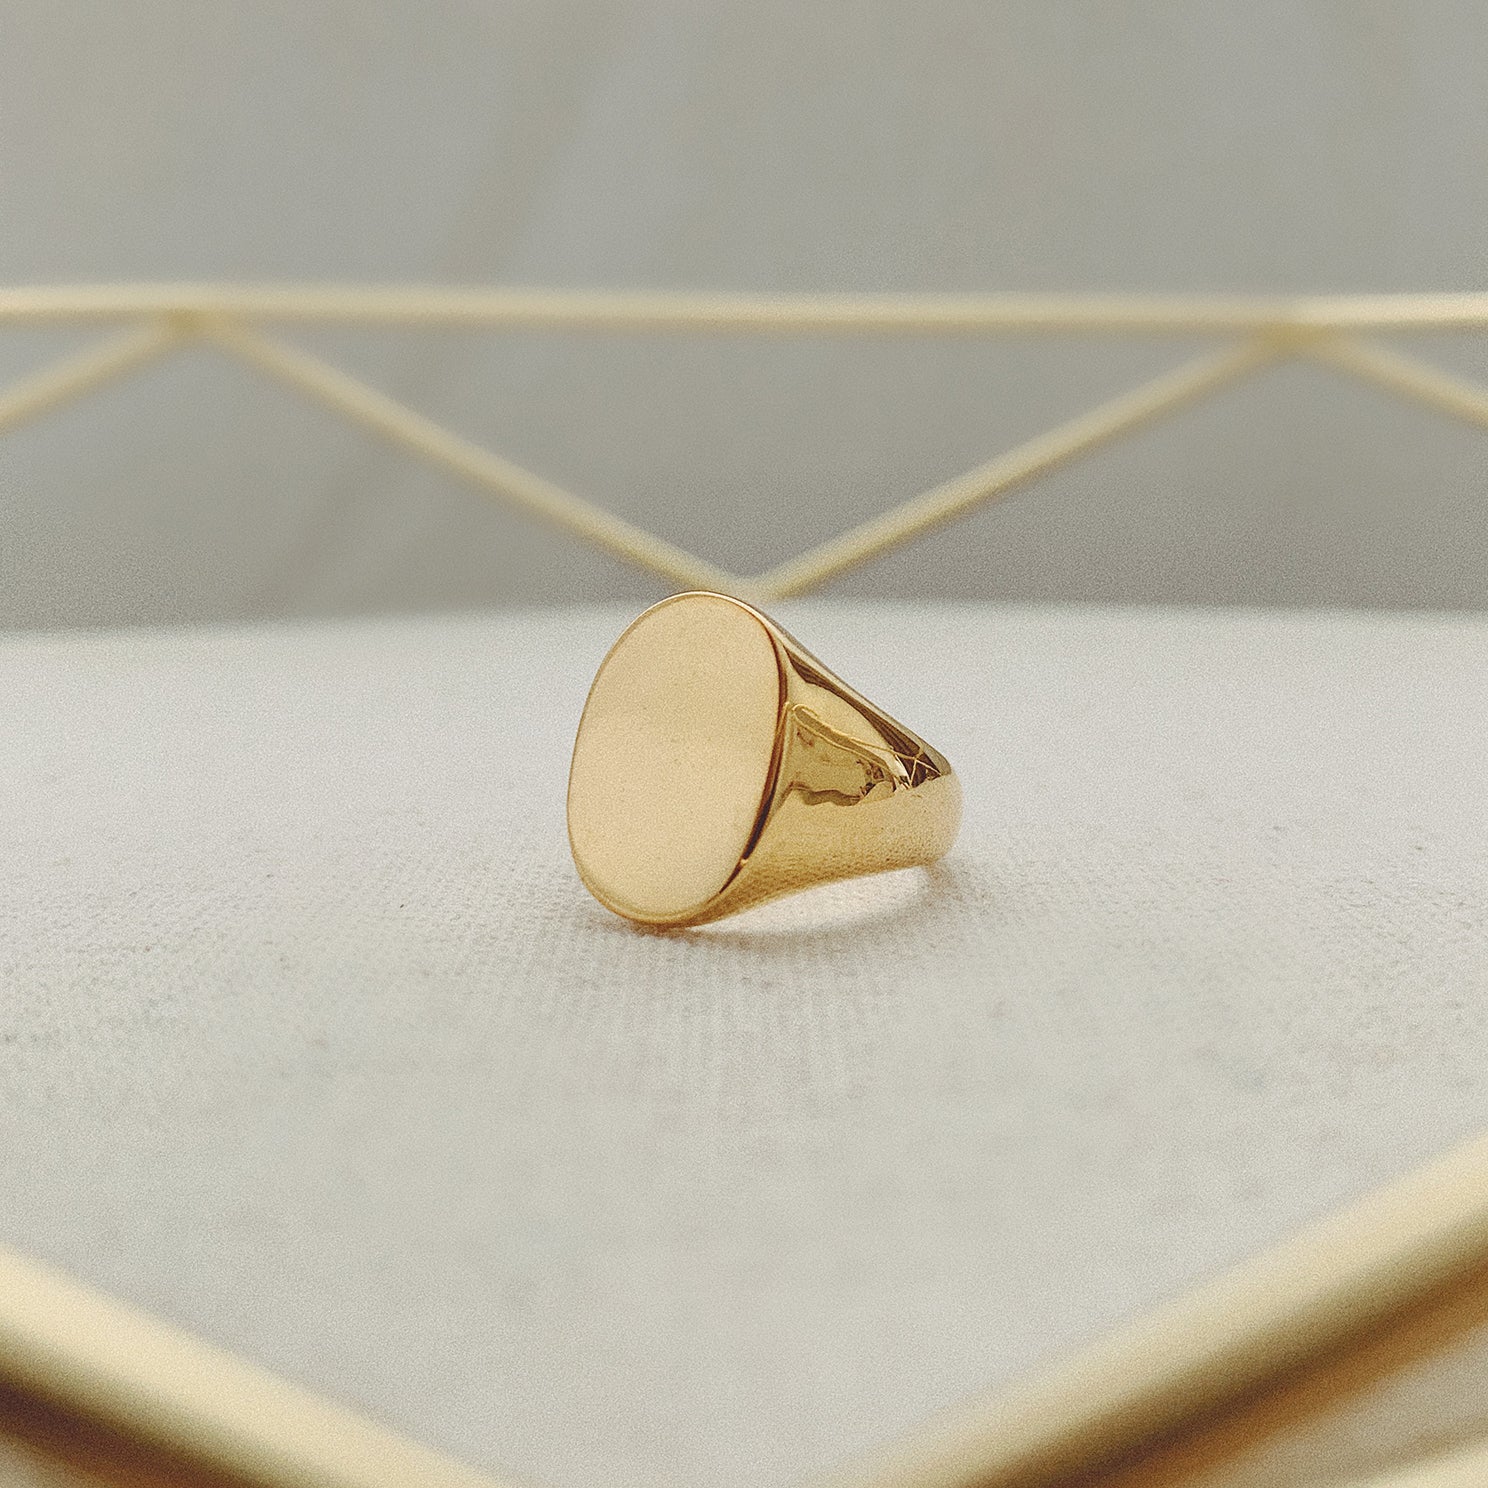 The Oval Signet Ring